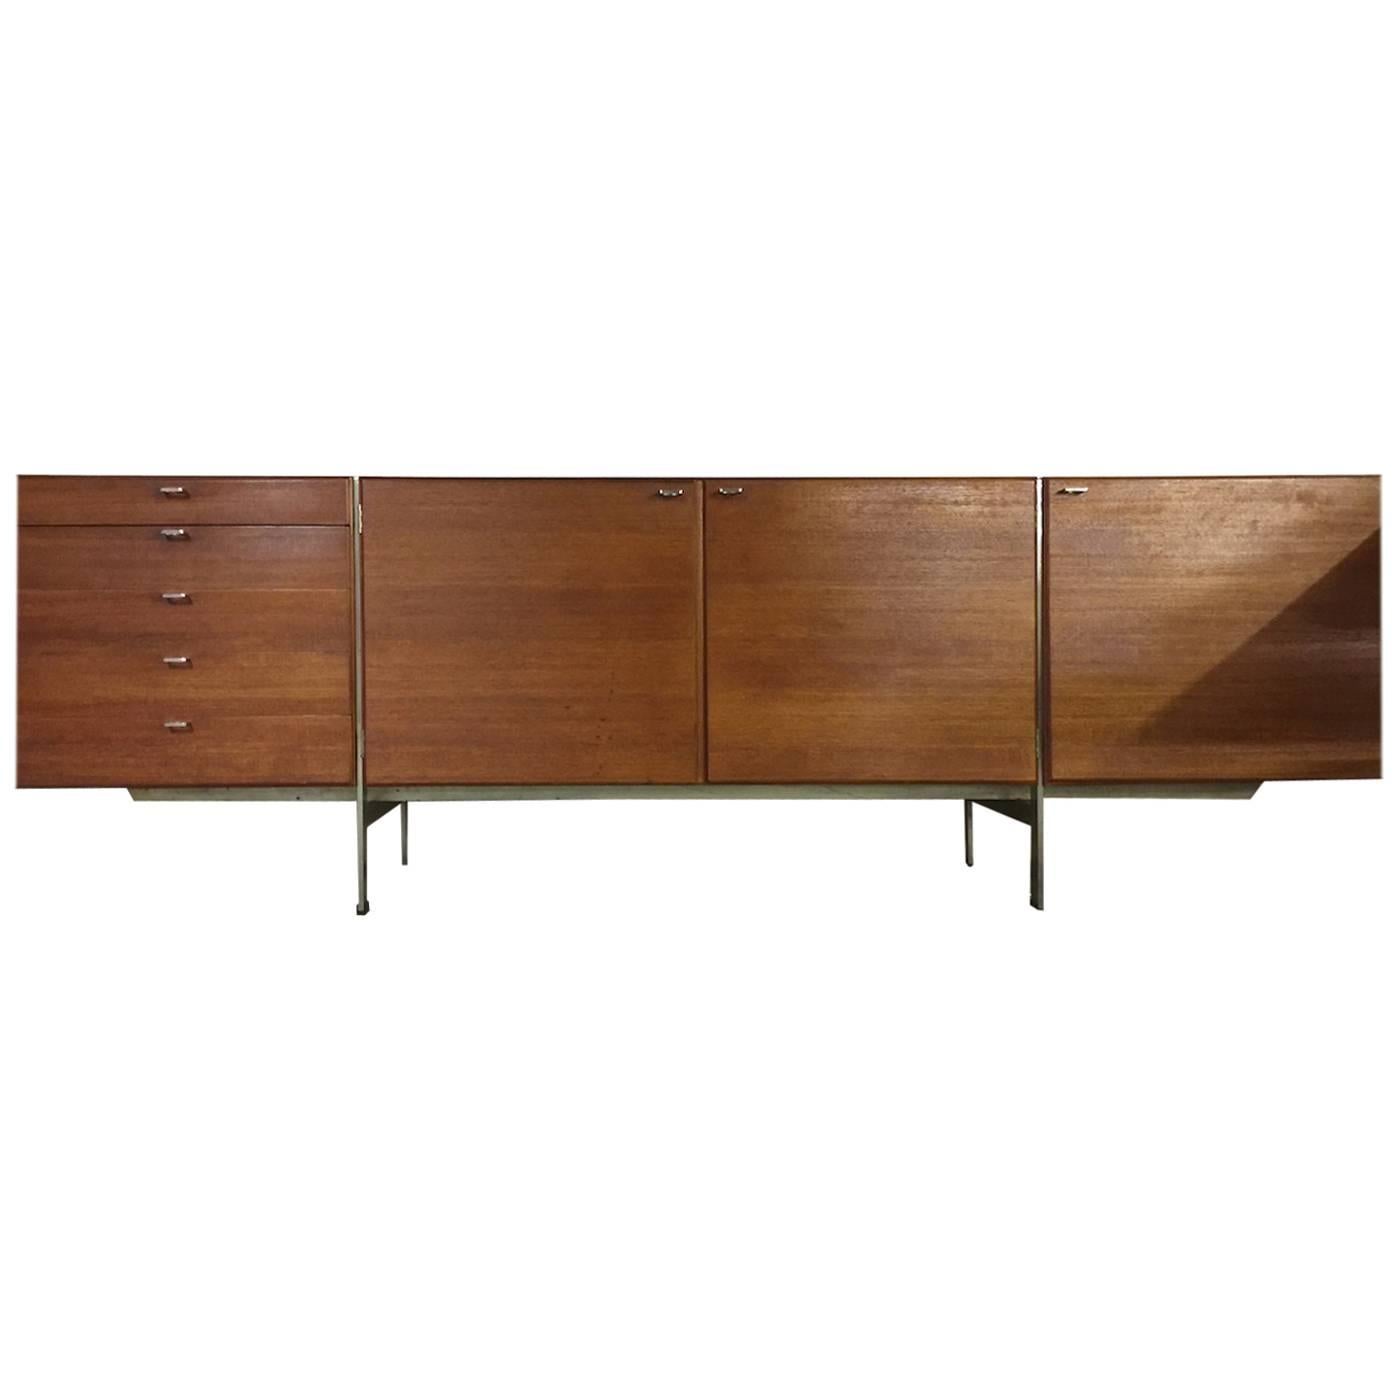 Extremely Rare and Exquisite Ib Kofoed-Larsen Sideboard